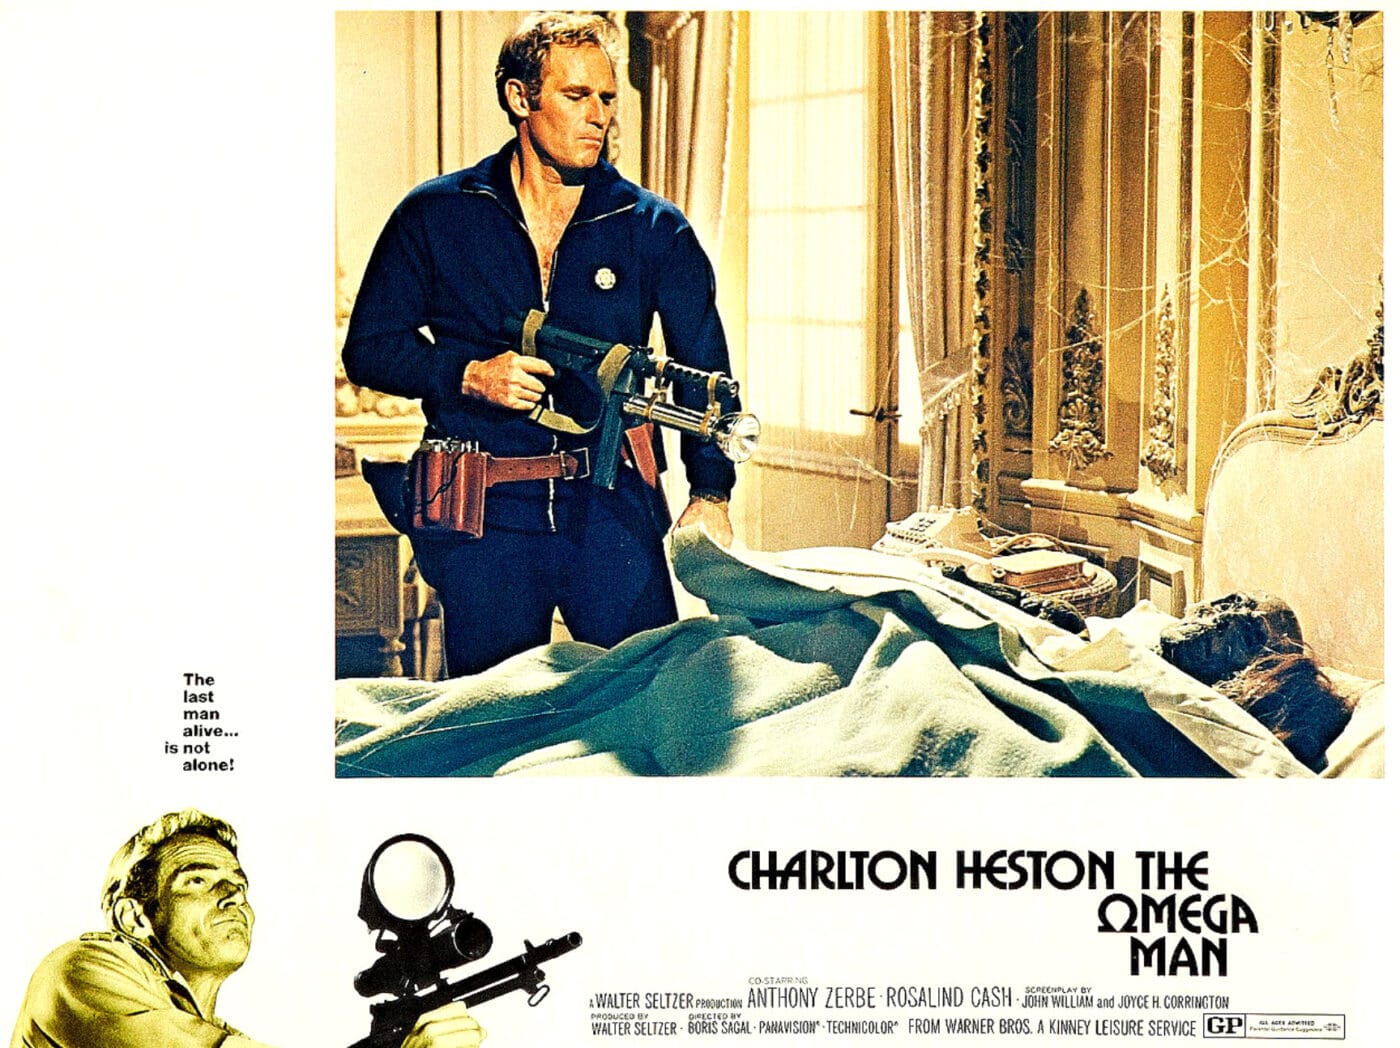 The Omega Man poster with Heston holding an M76 SMG